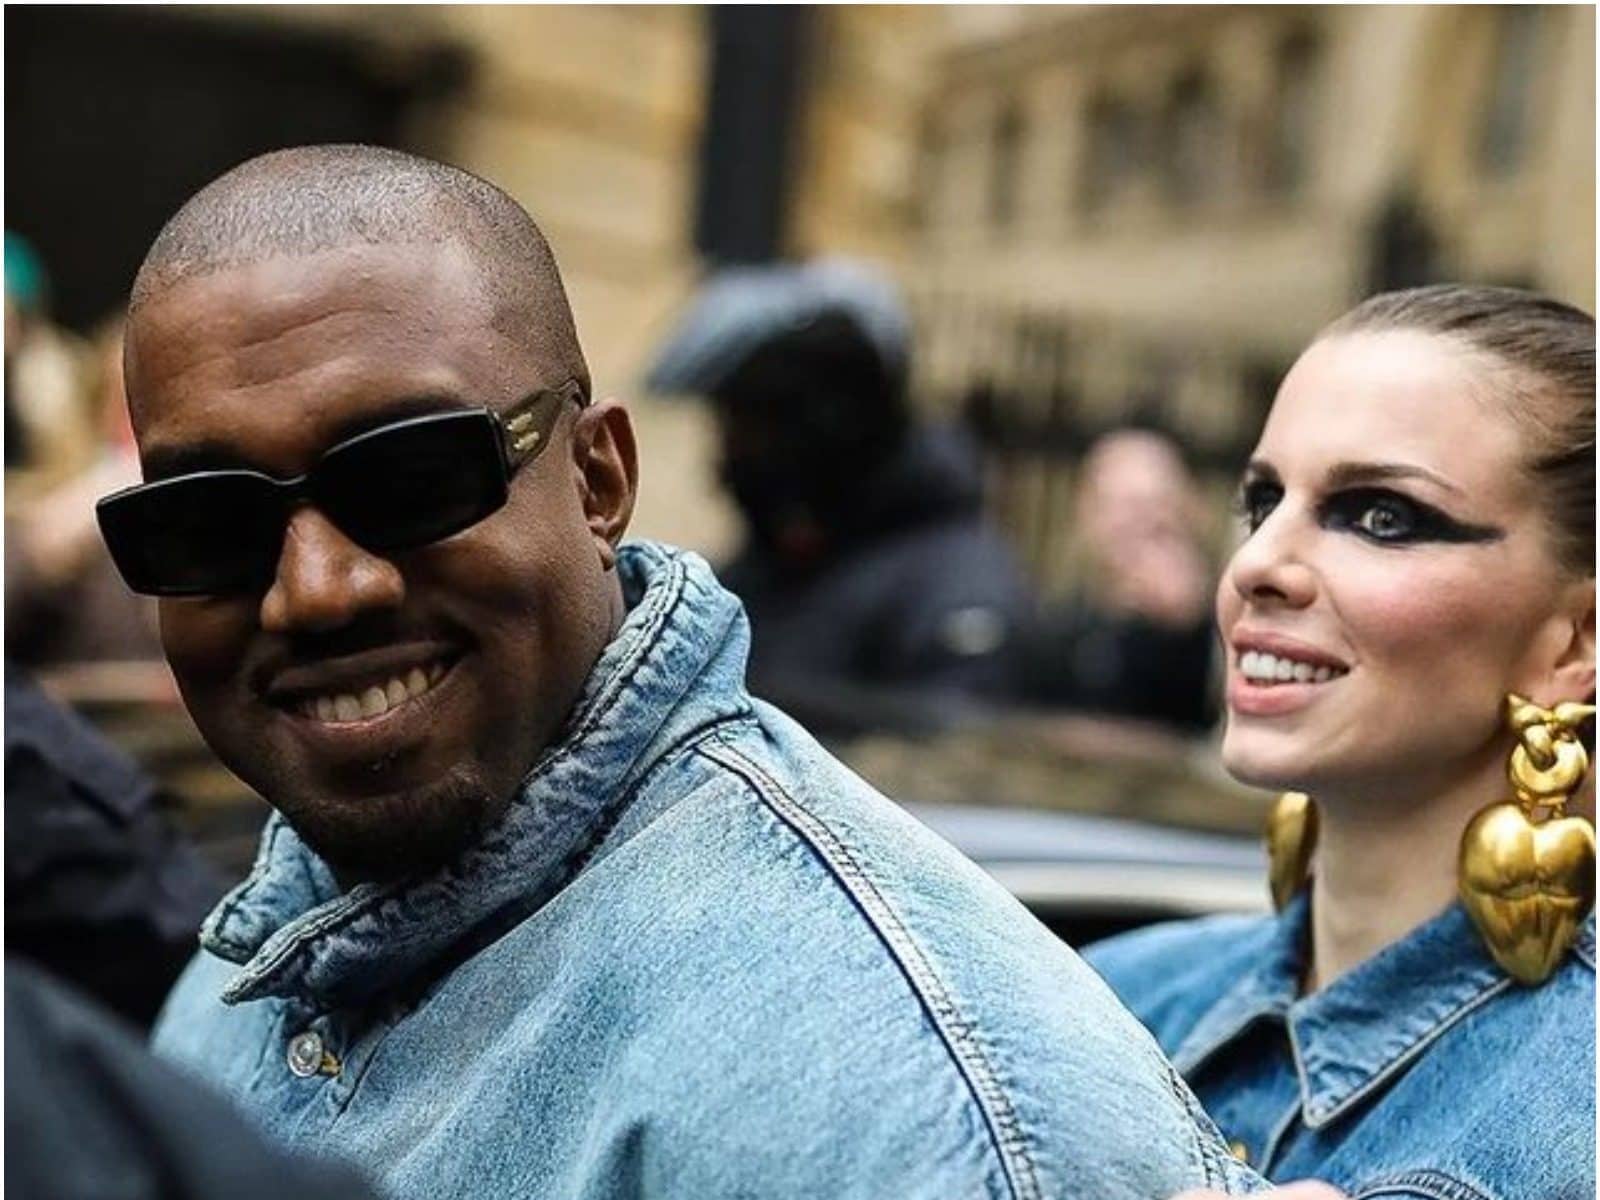 Kanye West Buys Julia Fox and Friends Birkin Bags for Birthday